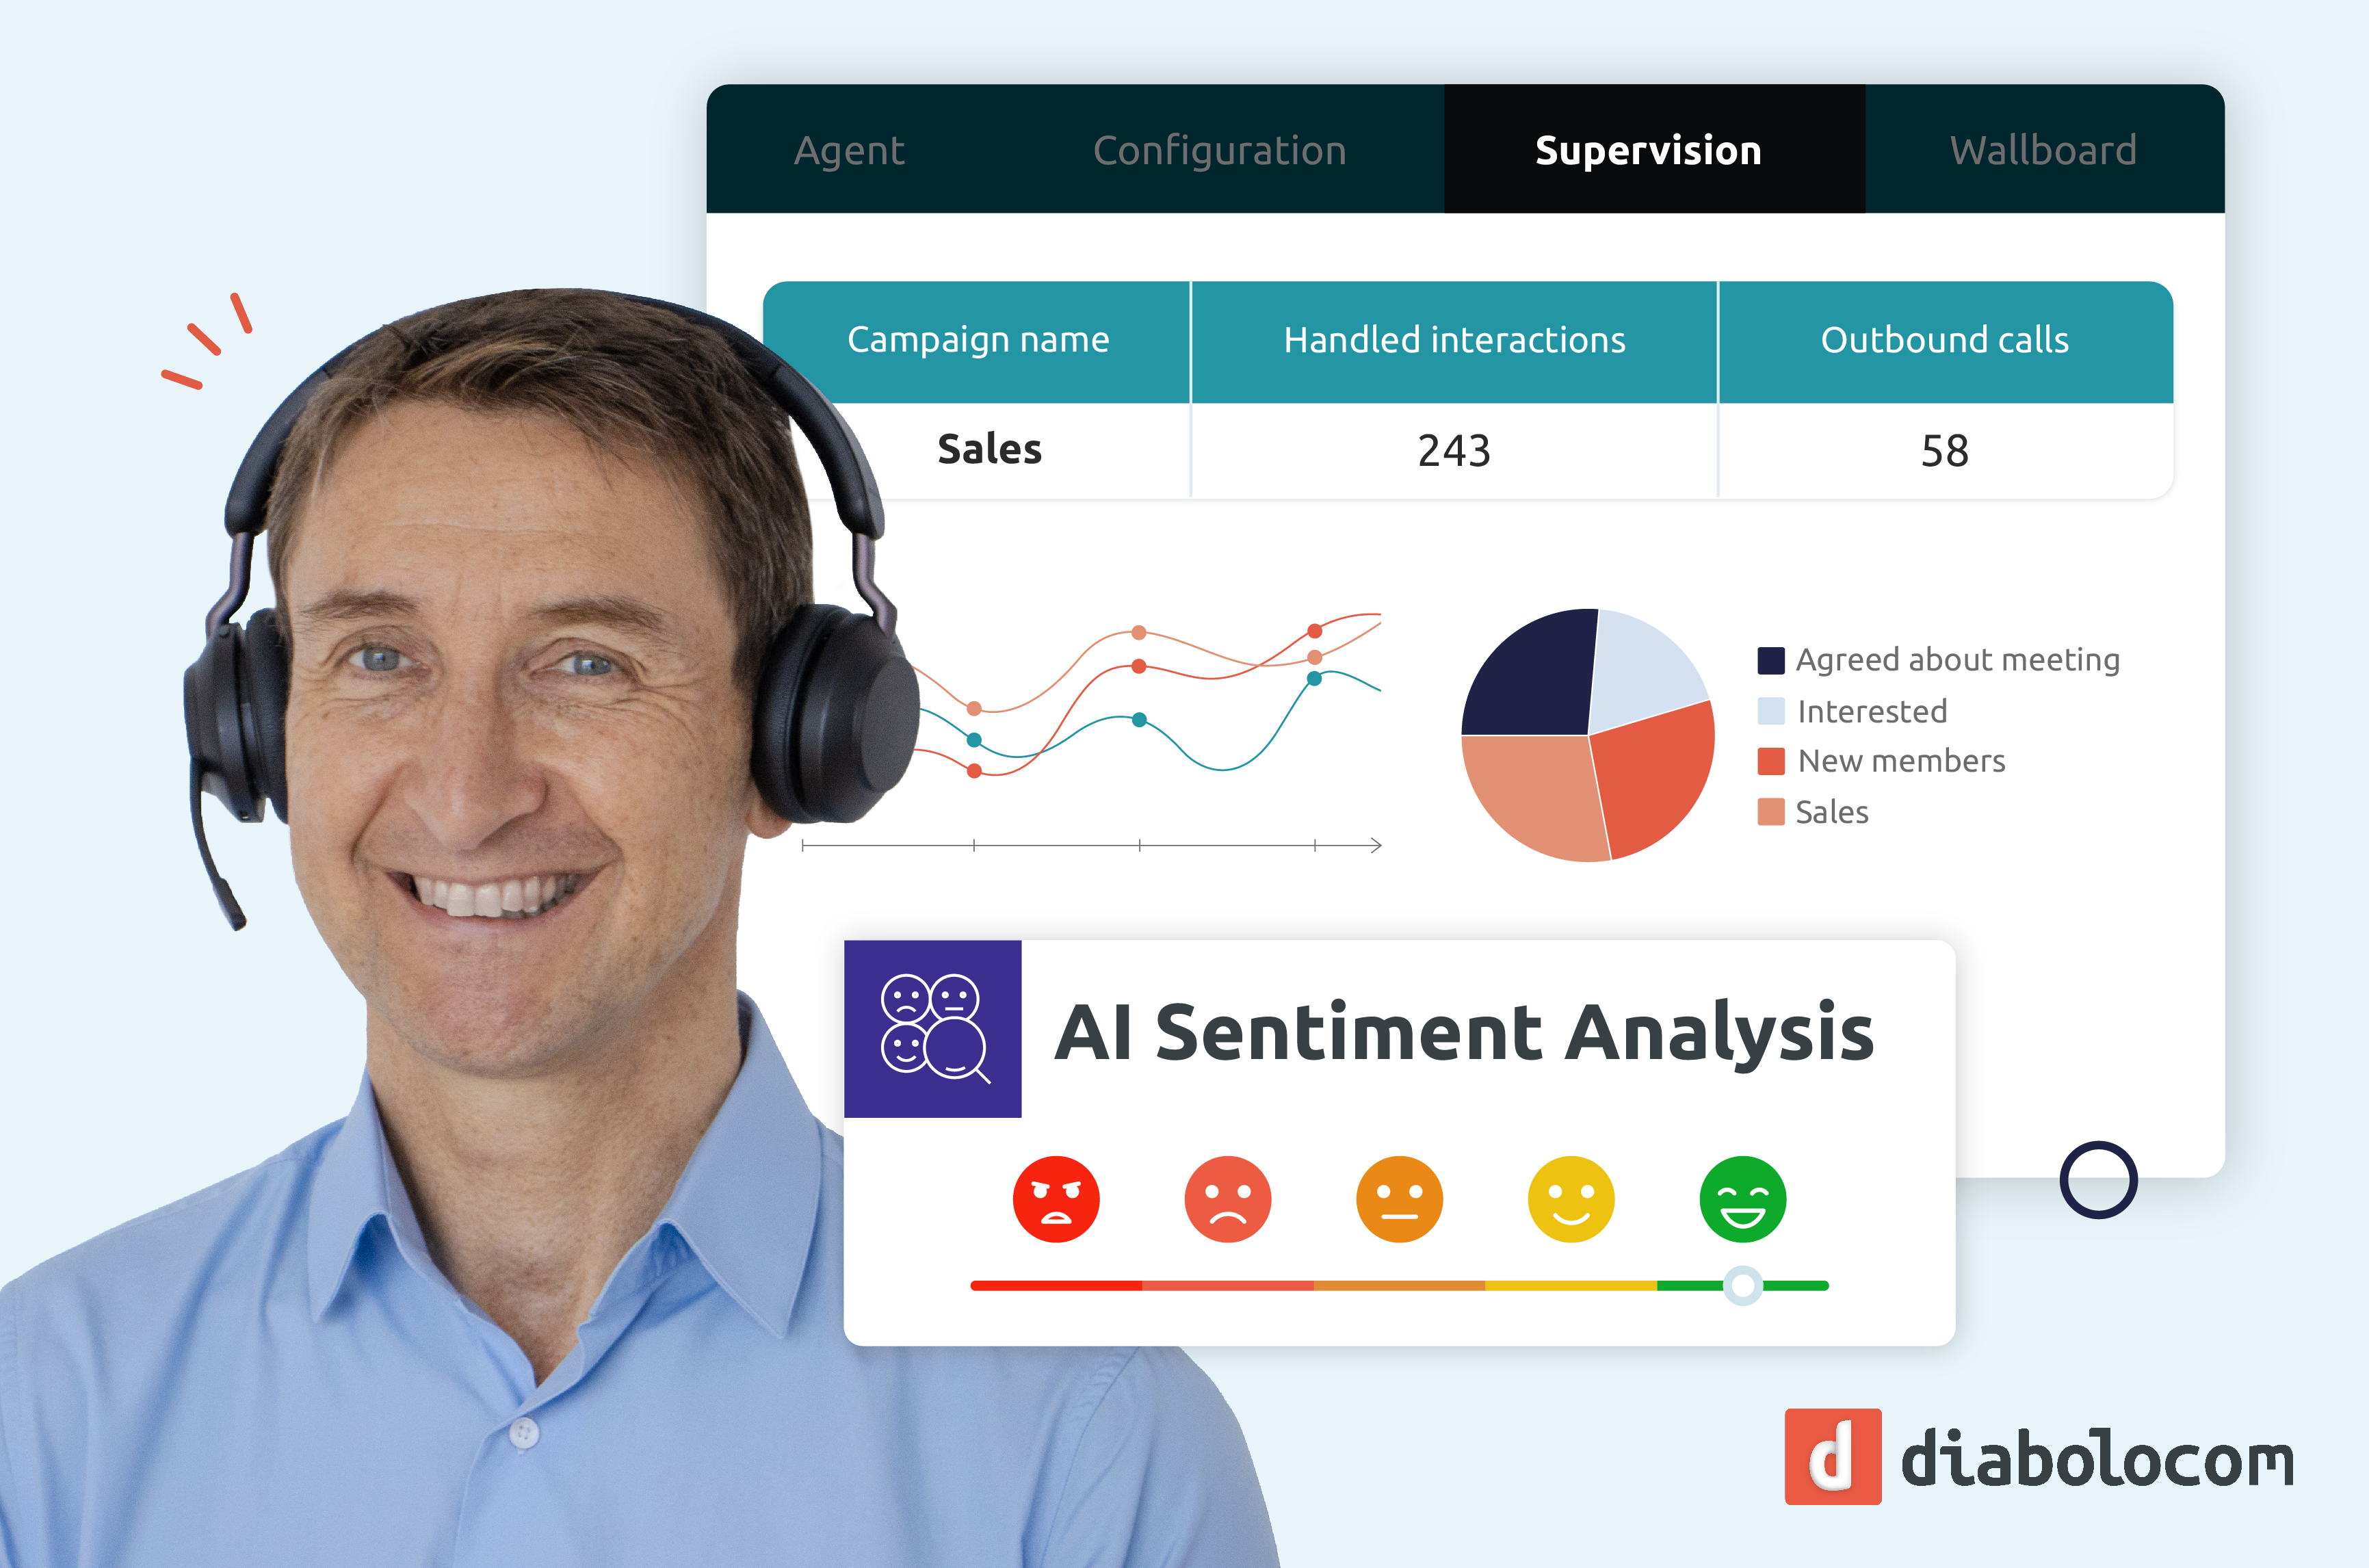 Diabolocom's solution provides dashboards to monitor the activity of your contact center in real-time. Our statistical tools enable you to better understand your customer expectations.